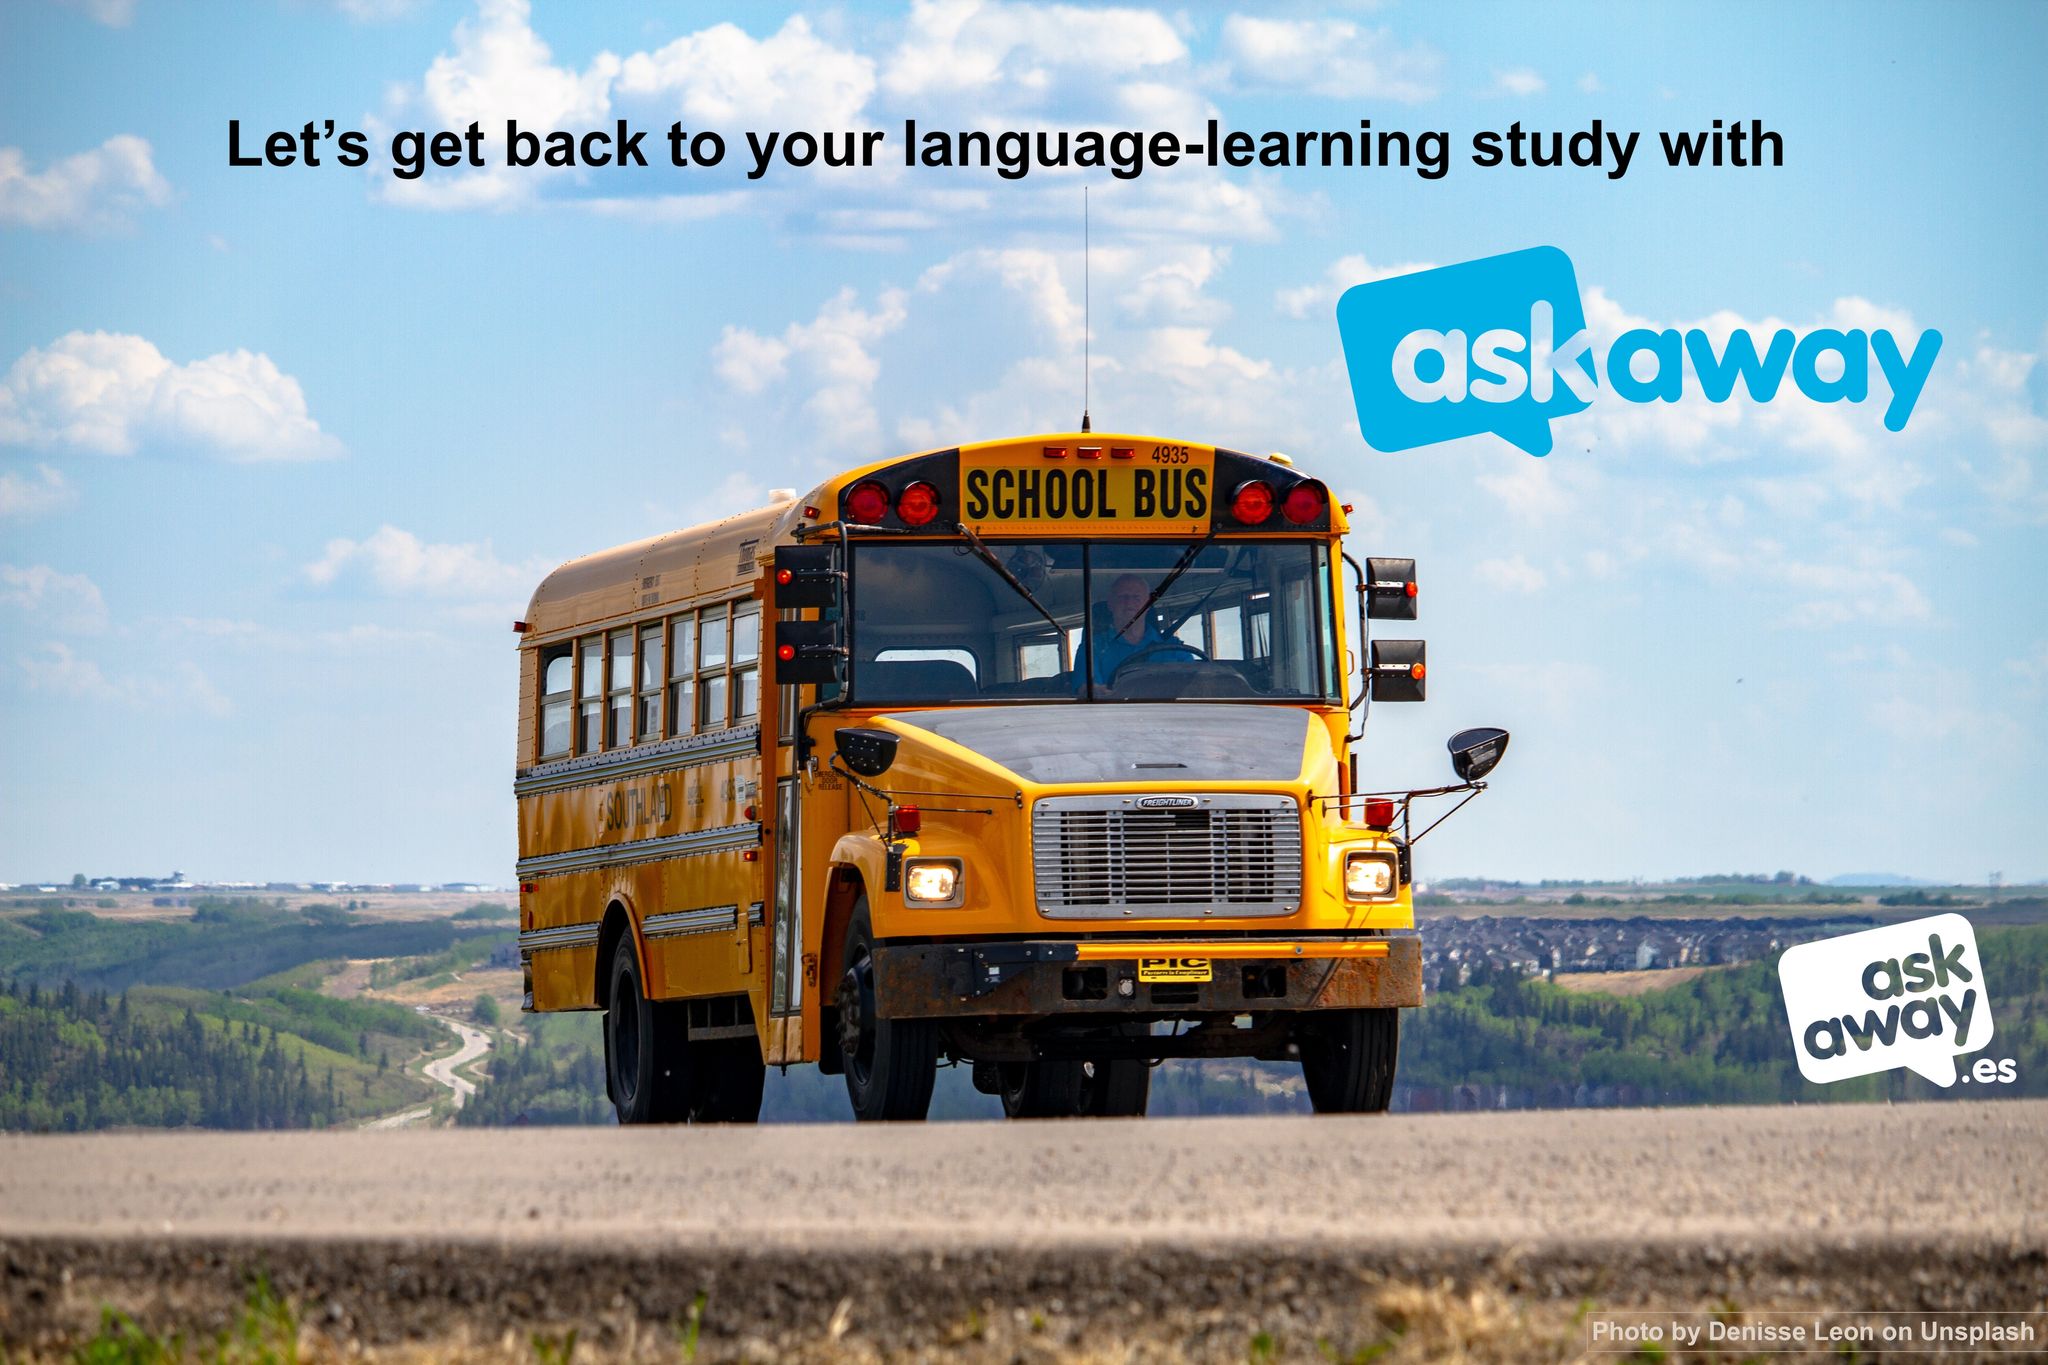 Let’s get back to your language-learning study…